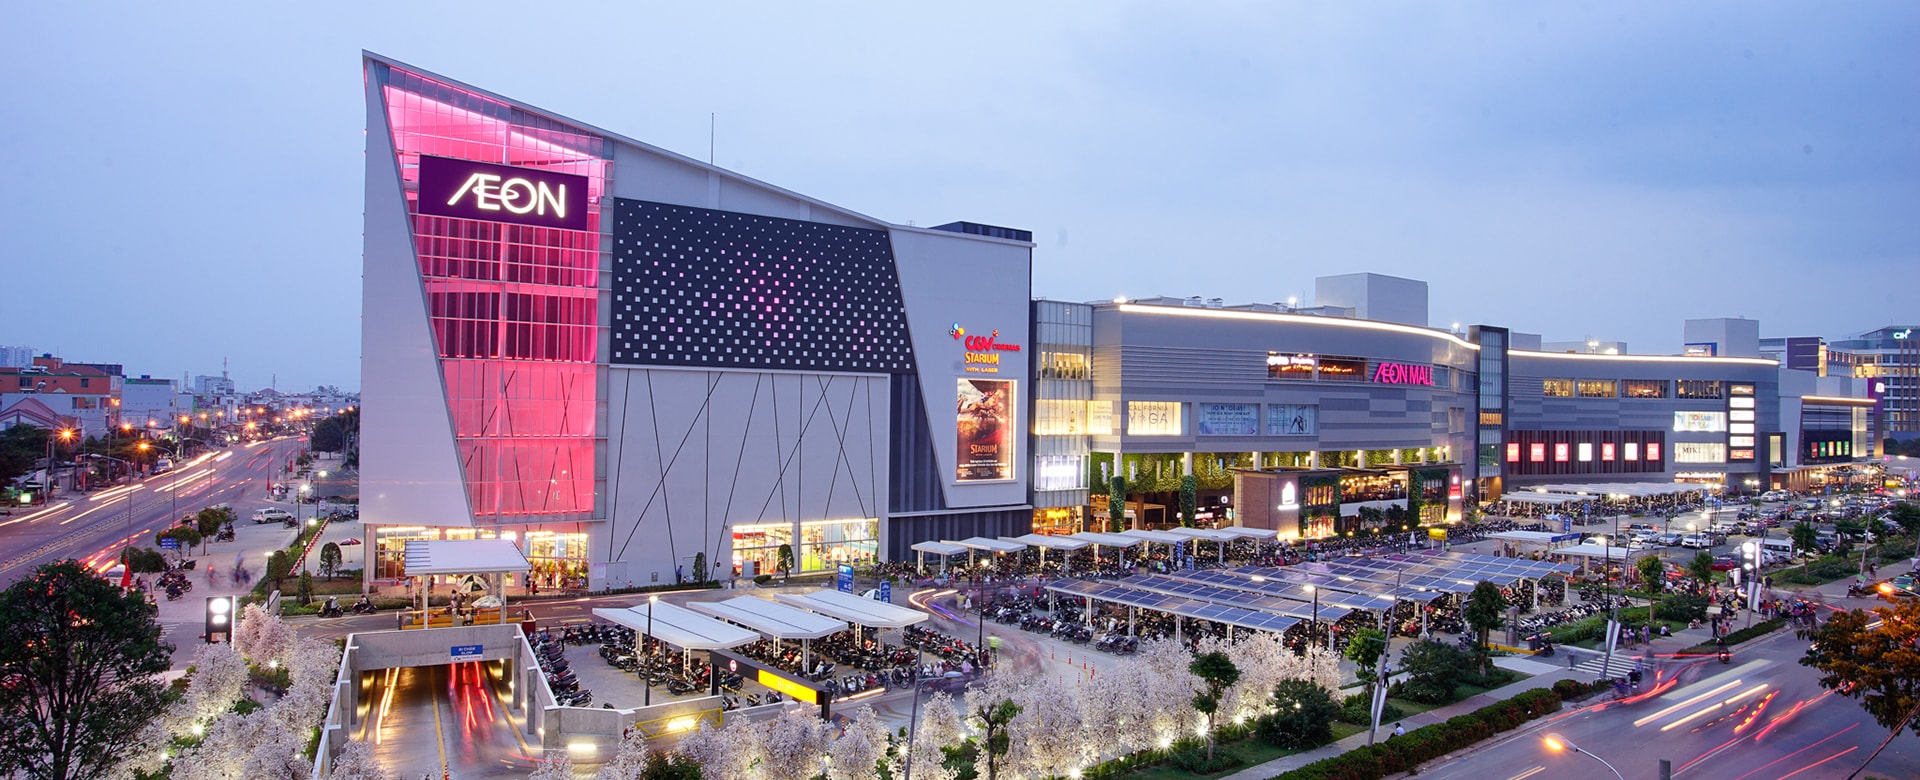 AEONMALL Vietnam – AEONMALL is a specialist shopping mall developer. Our  philosophy of putting the customer first has guided our continuing efforts  to create malls that enhance the quality of life, stimulate